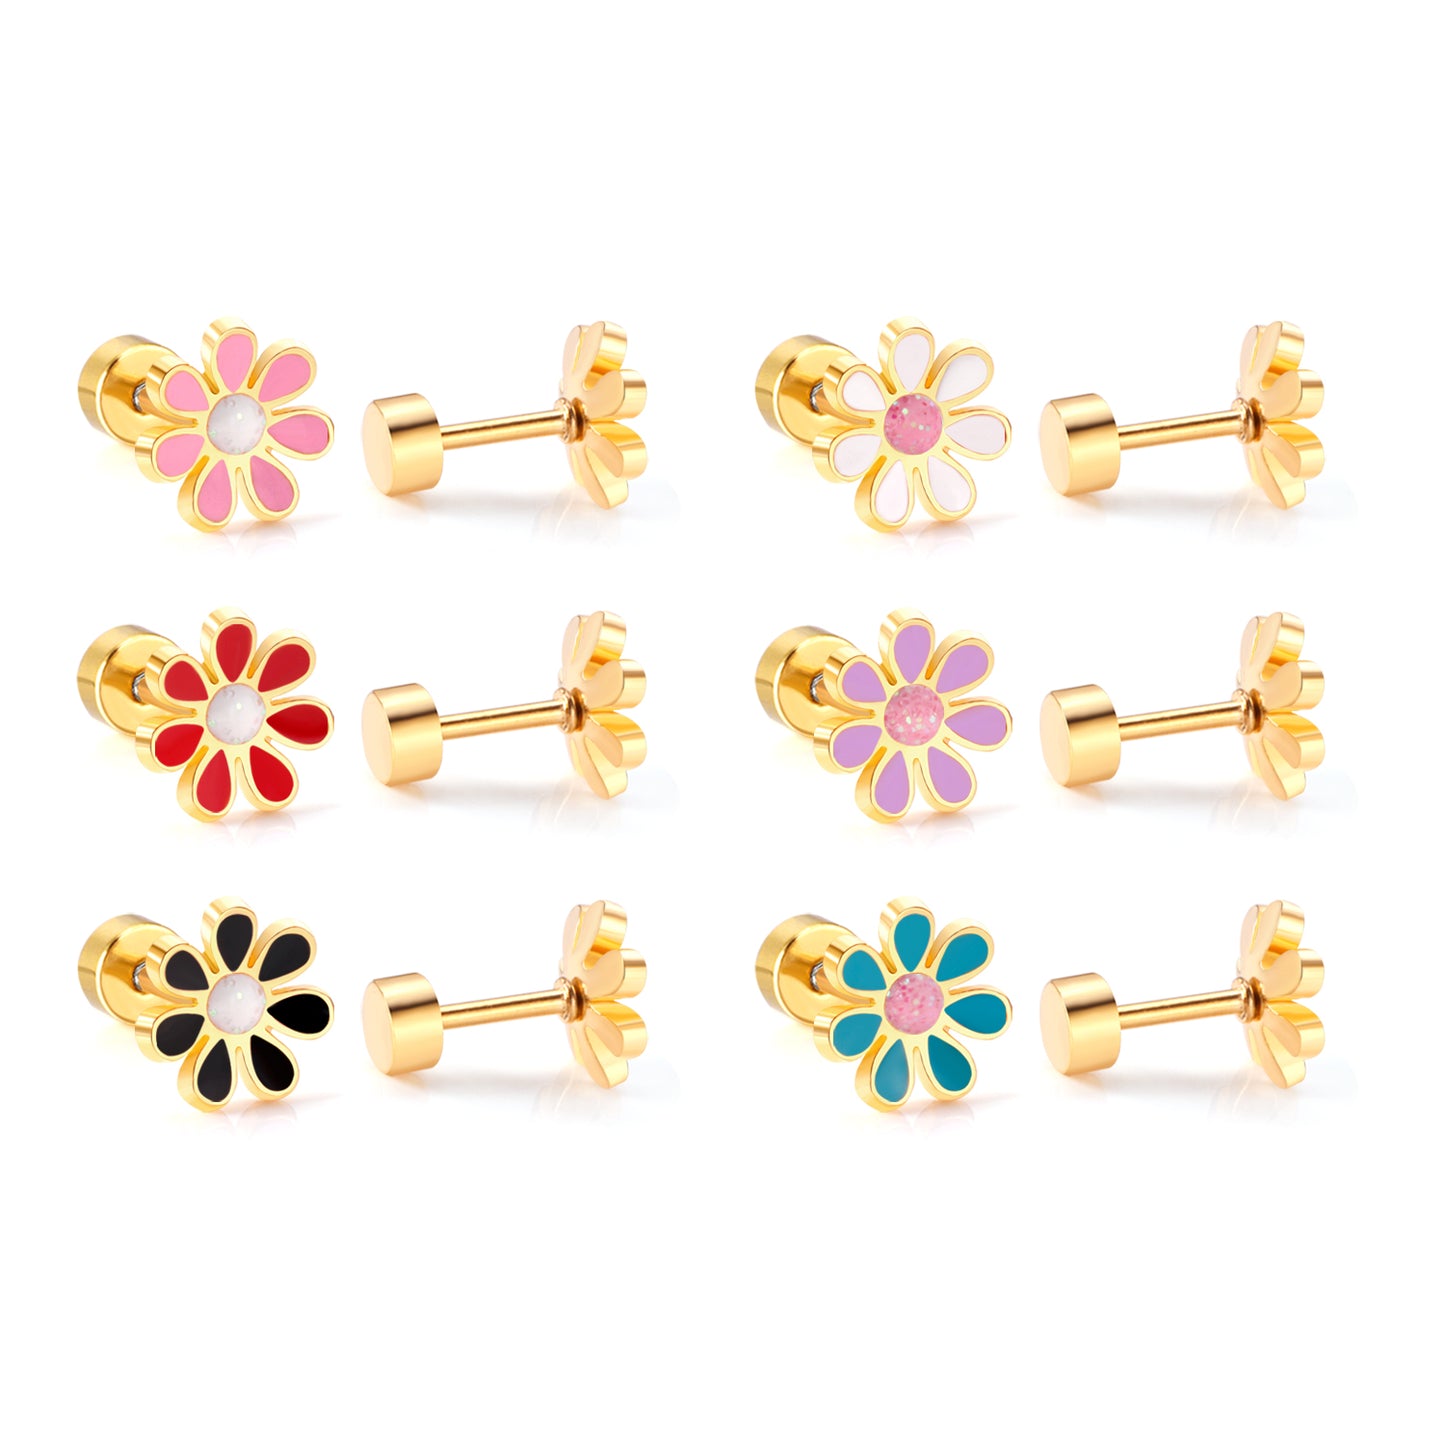 Children's Earrings:  Surgical Steel with Gold IP Red/White Flowers with Screw Backs